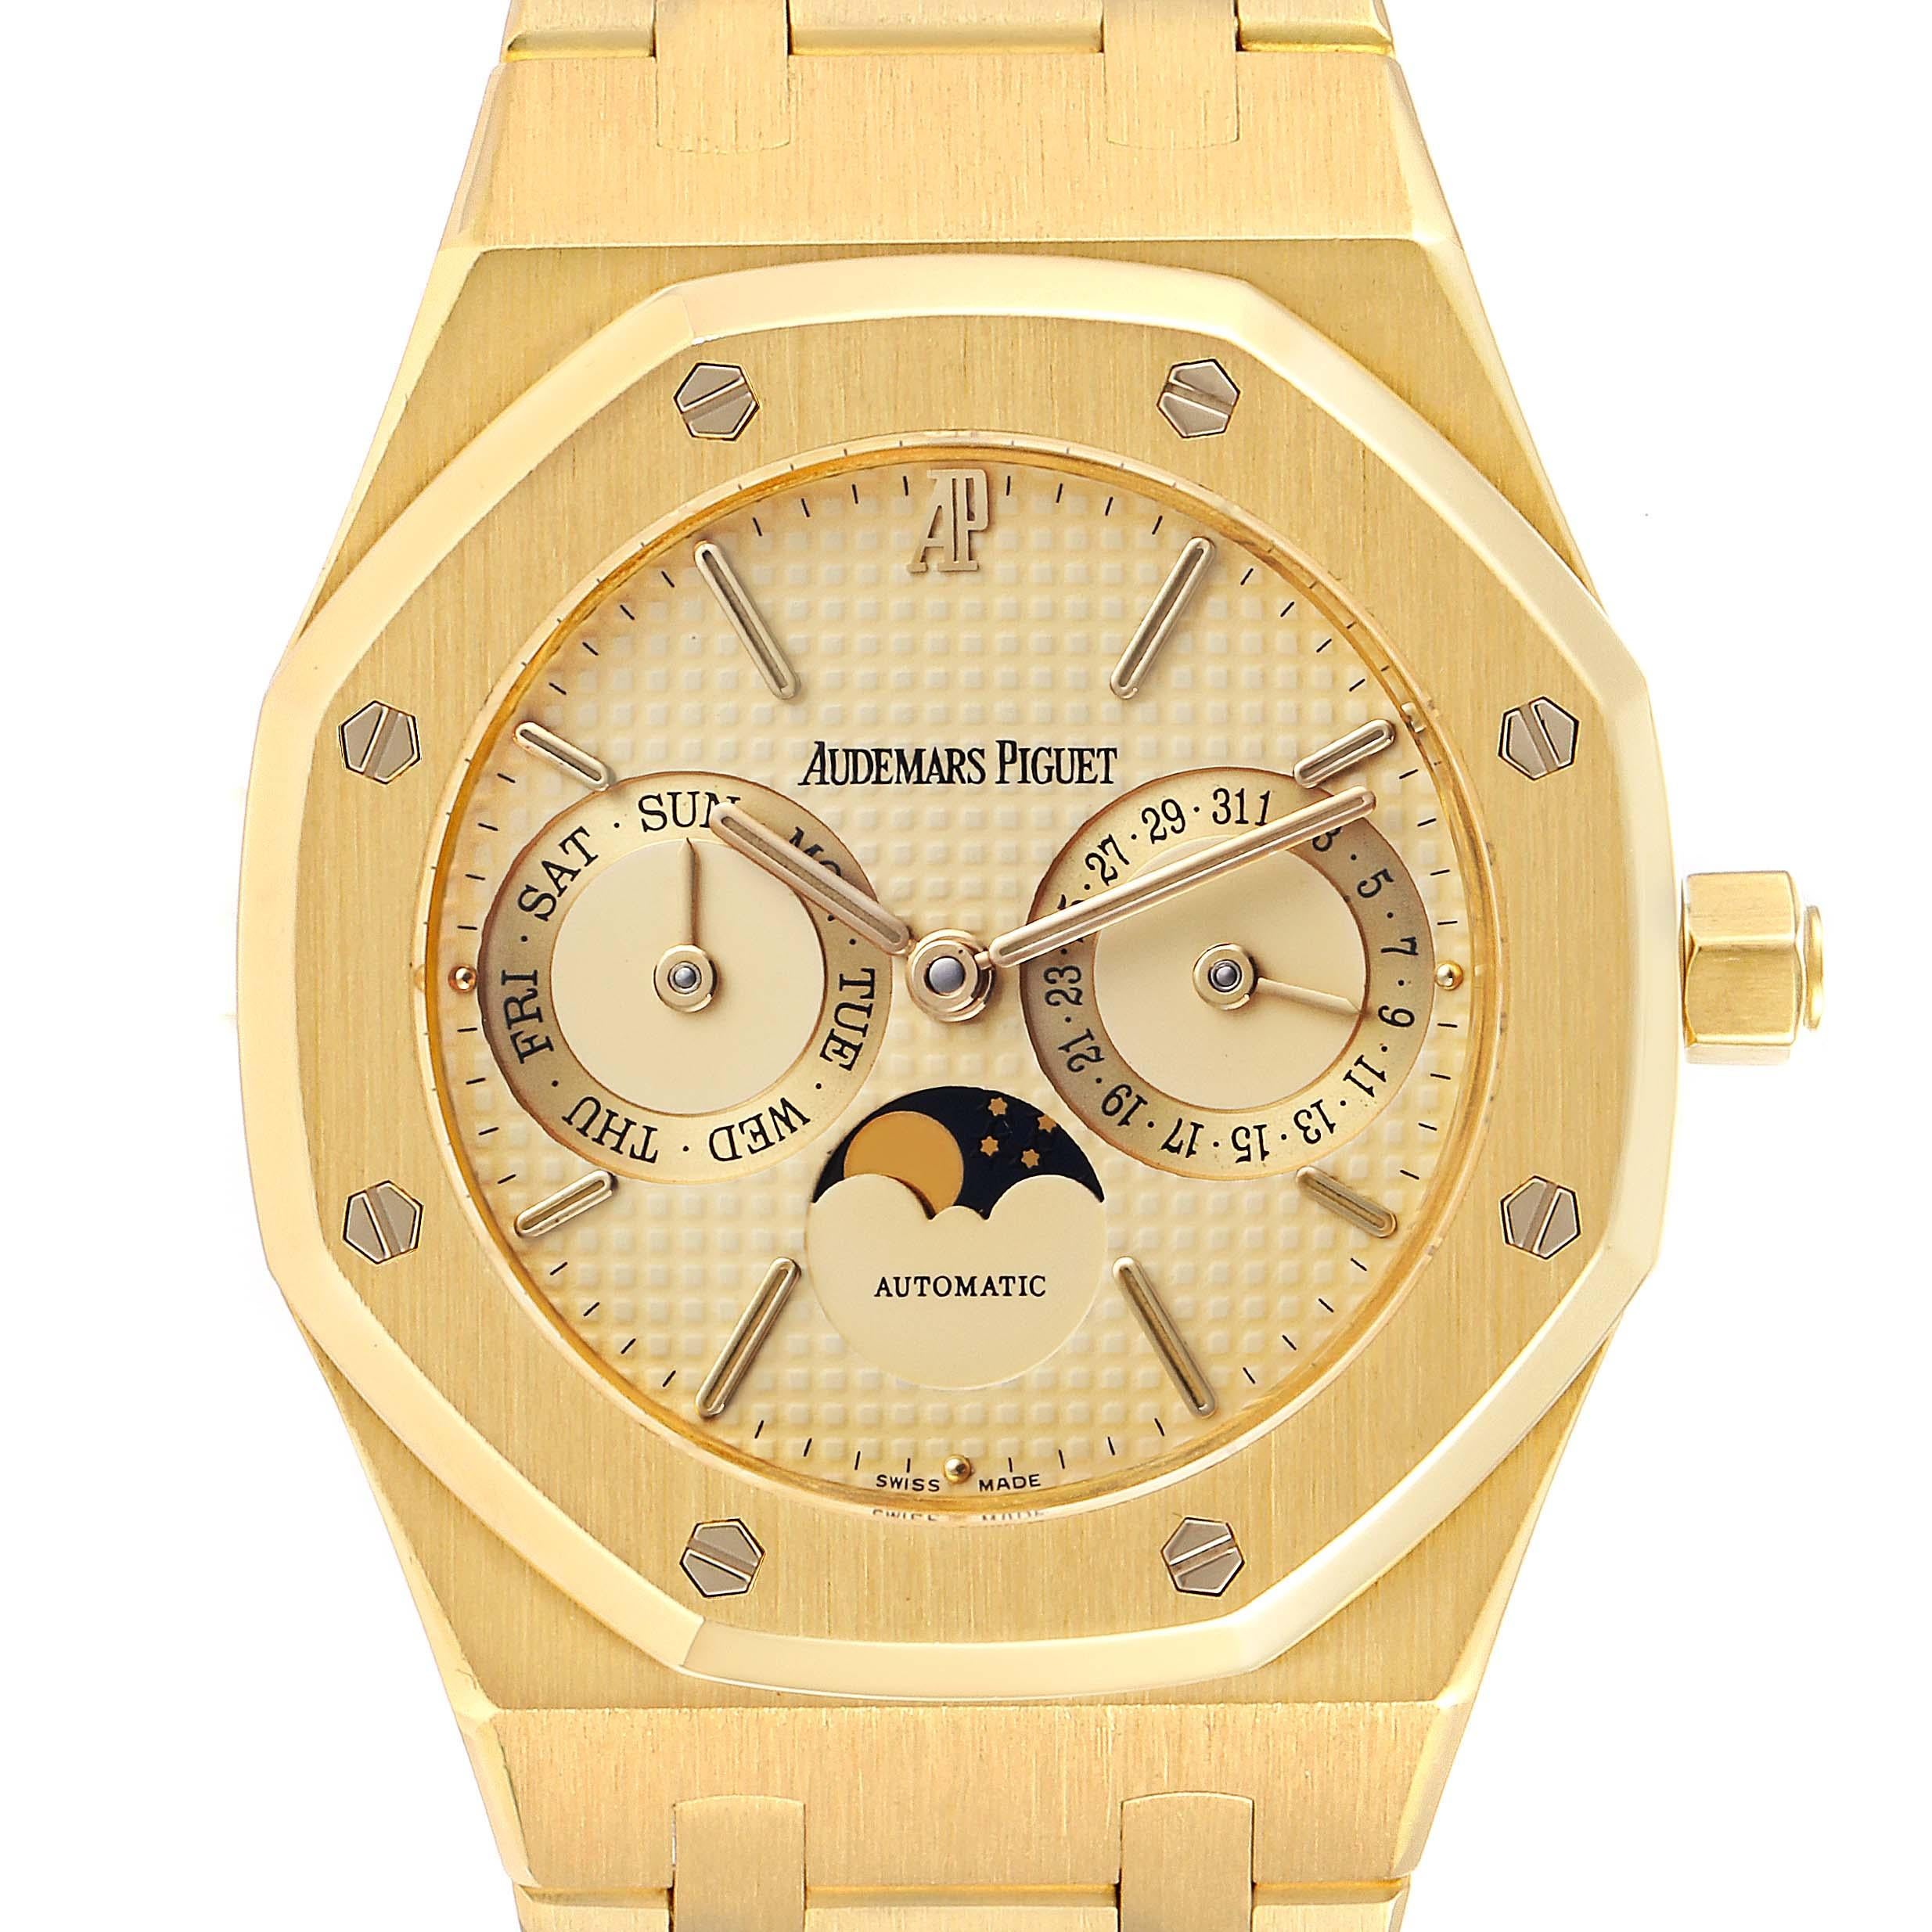 Audemars Piguet Royal Oak Yellow Gold Day Date Moonphase Mens Watch 25594. Automatic self-winding movement. 18K yellow gold case 36.0 mm in diameter. 18K yellow gold bezel punctuated with 8 signature screws. Scratch resistant sapphire crystal.